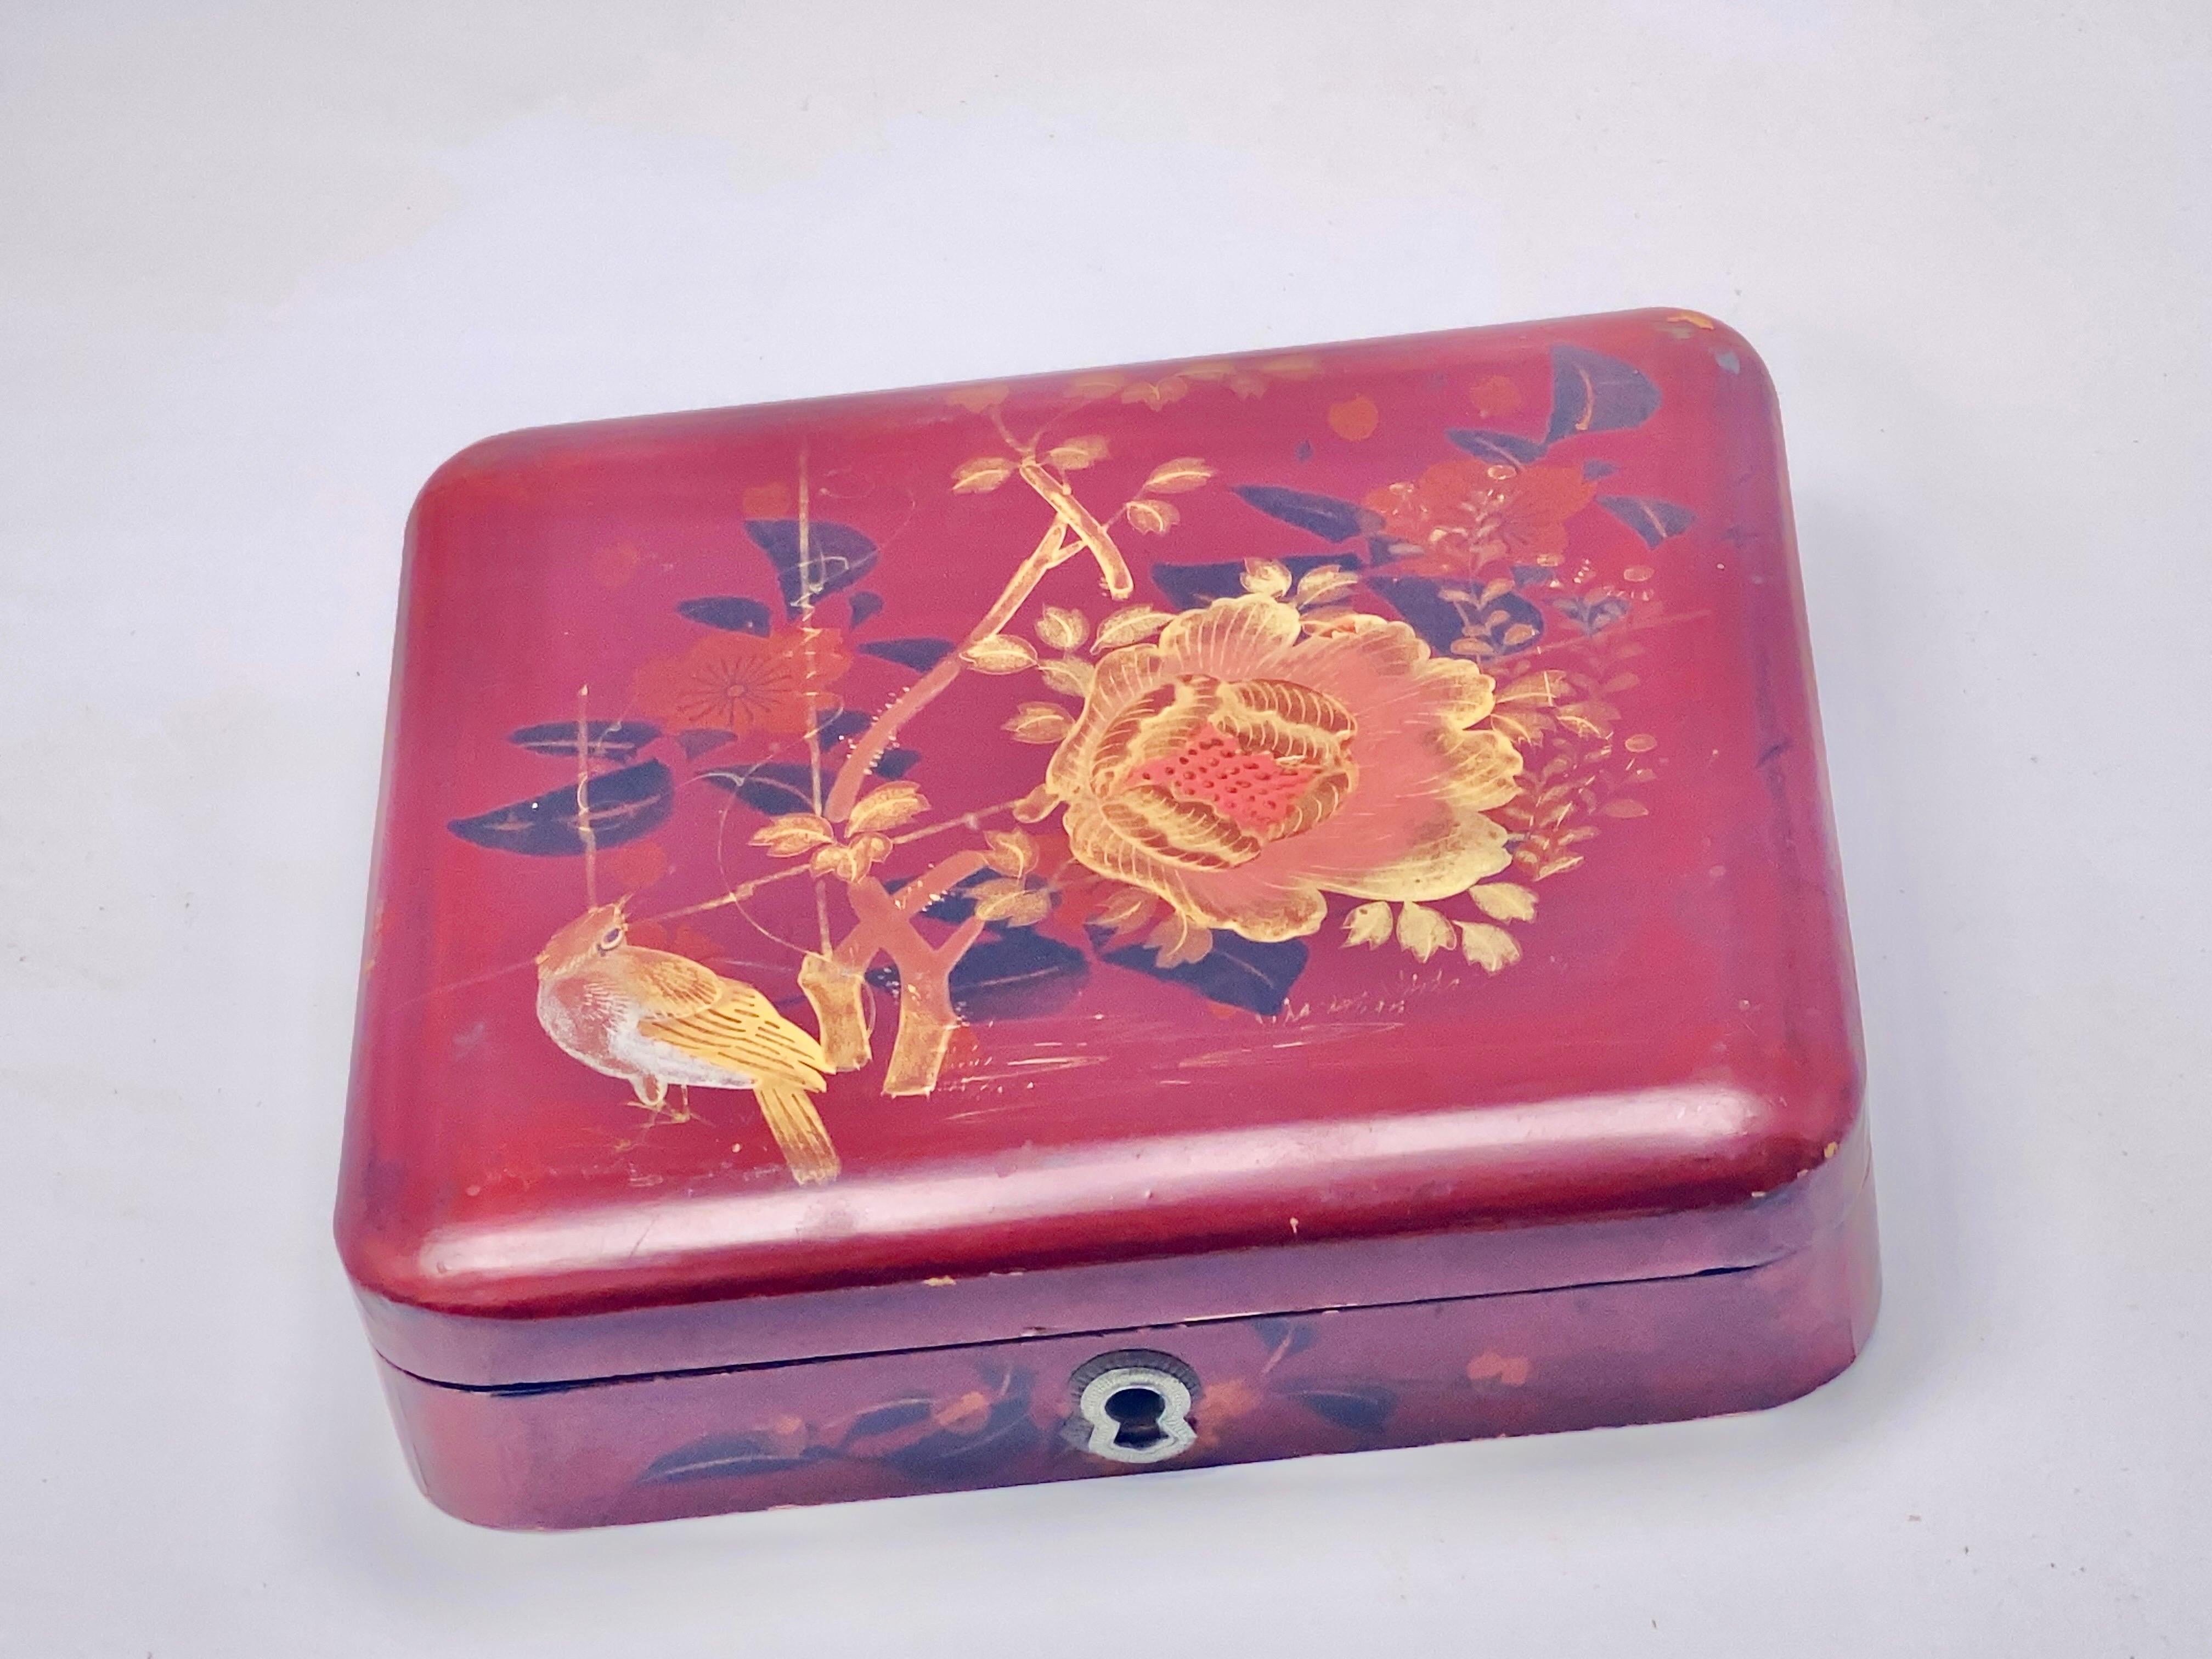 This box is a japanese box, early 20th century, in a red laquer, representing a bird and a flower.
This has been made in Japan.